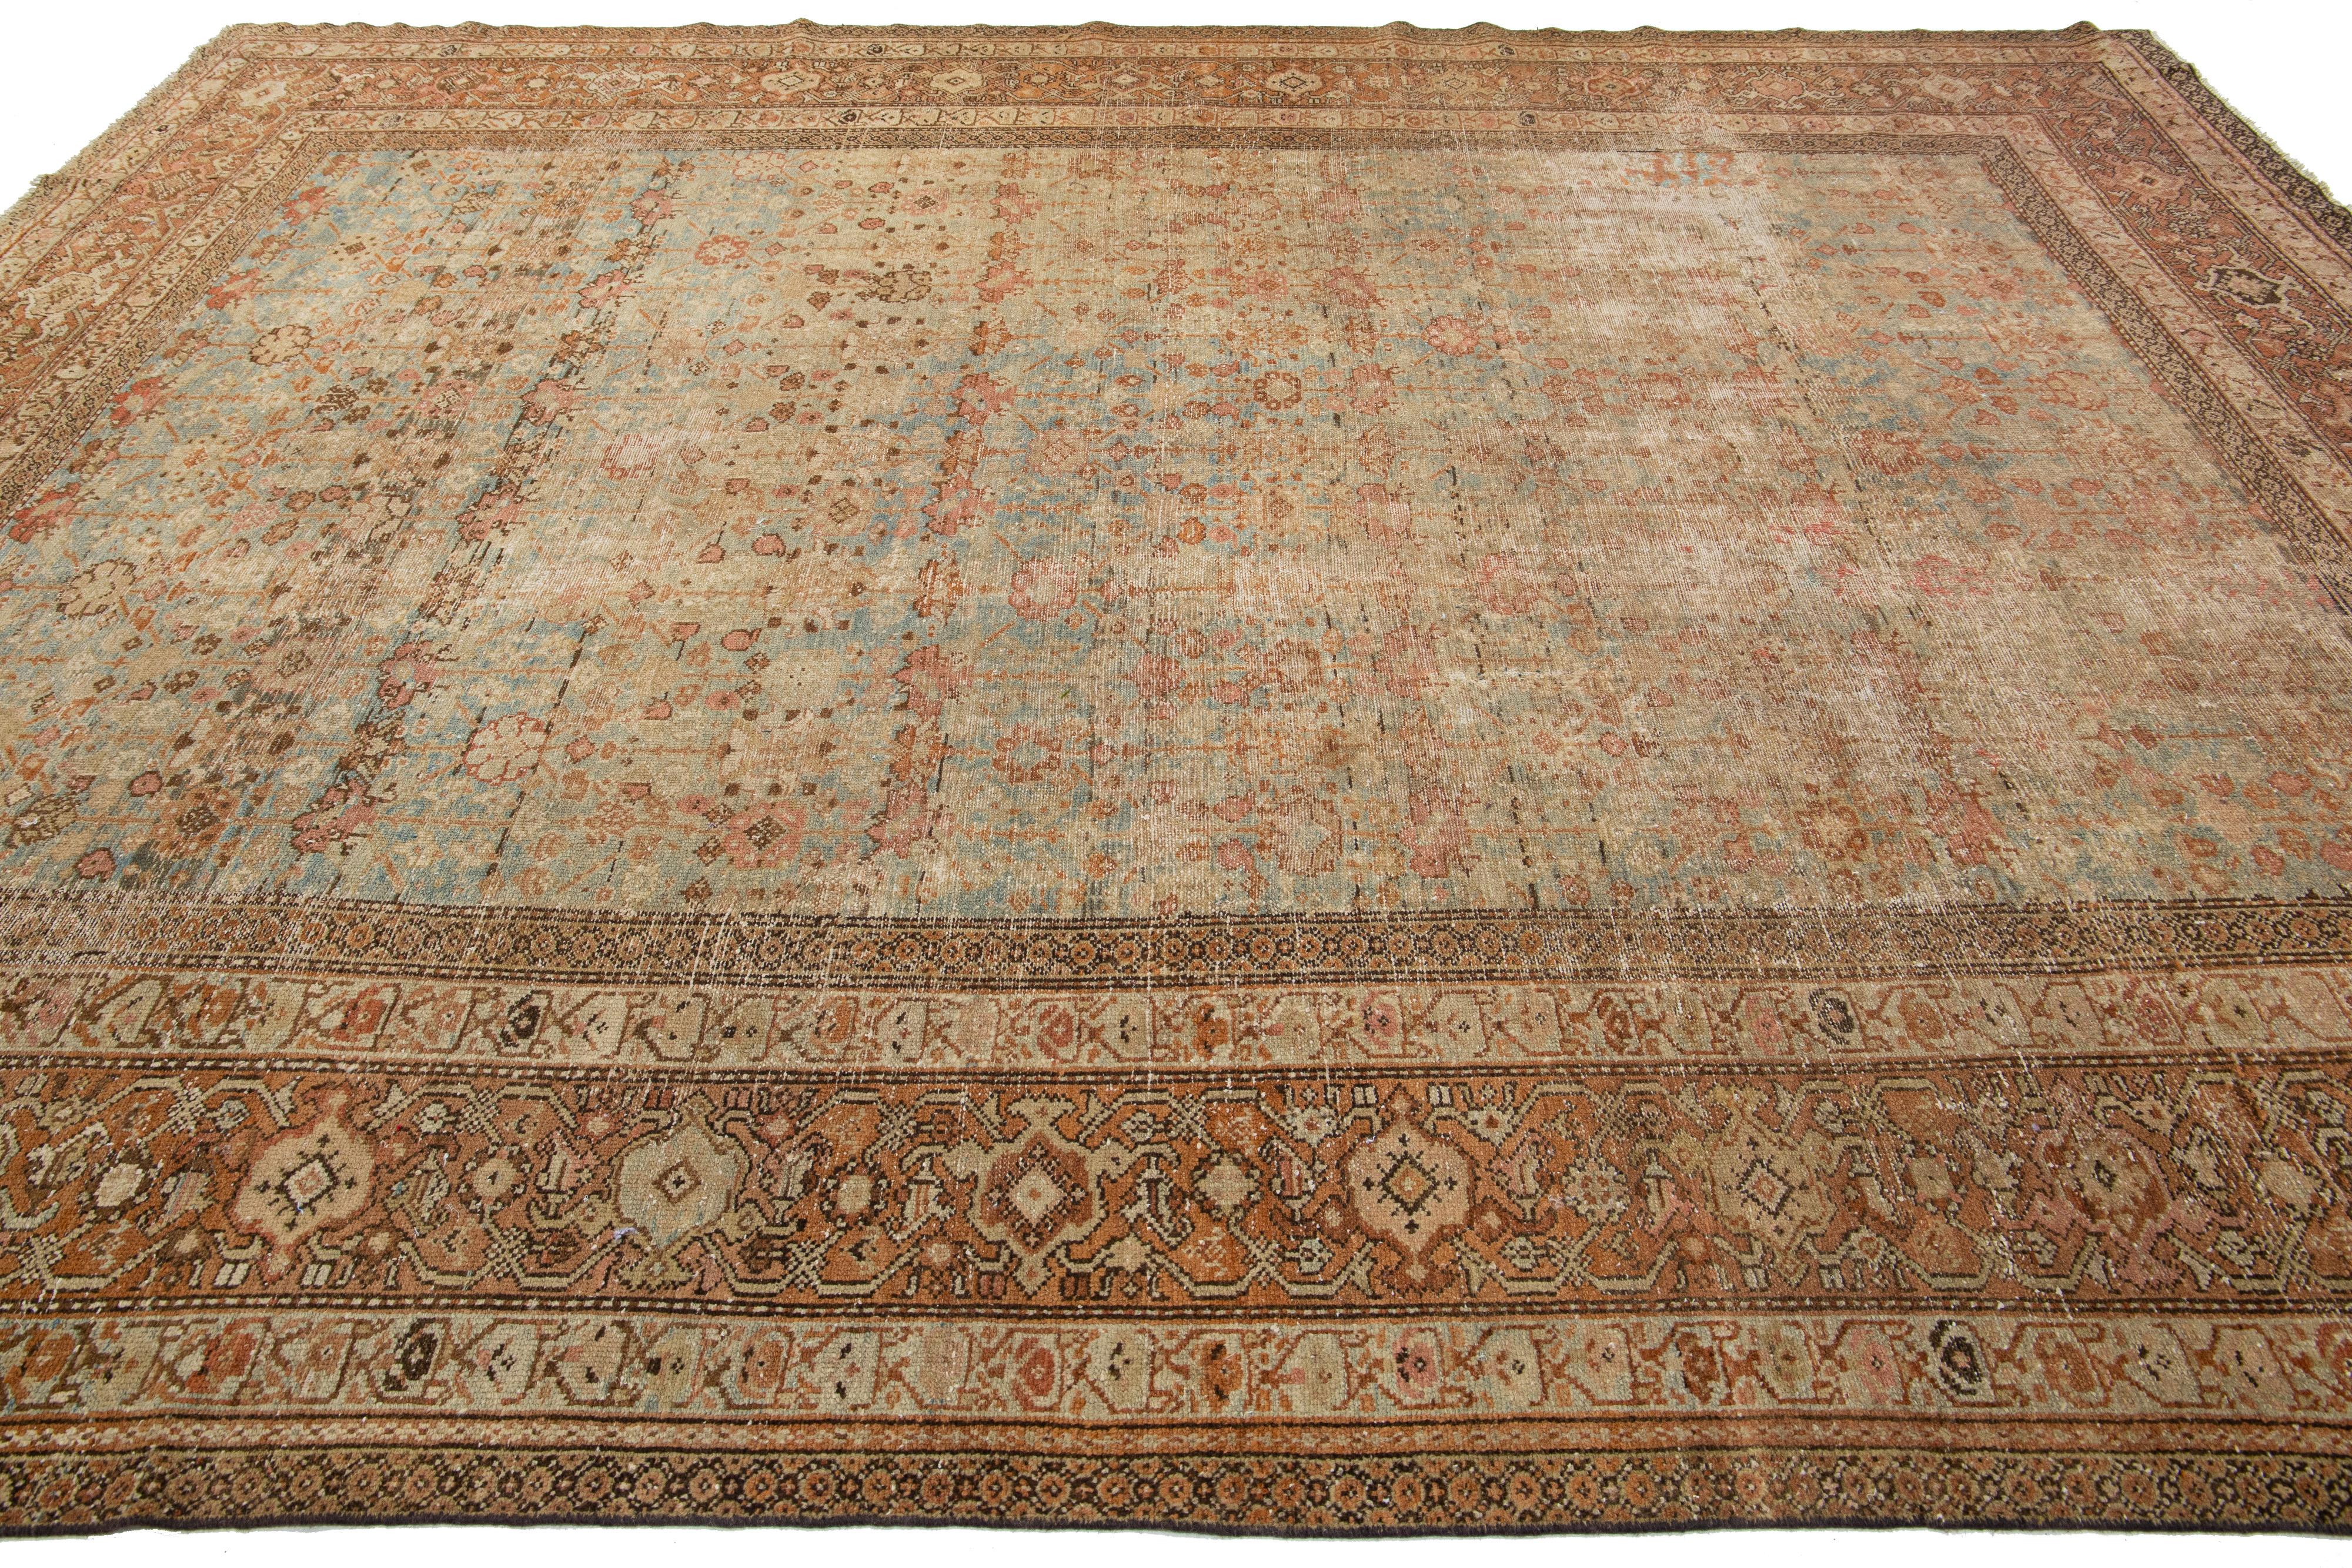 Handmade Antique Persian Malayer Wool Rug With Floral Motif From the 1920s For Sale 3